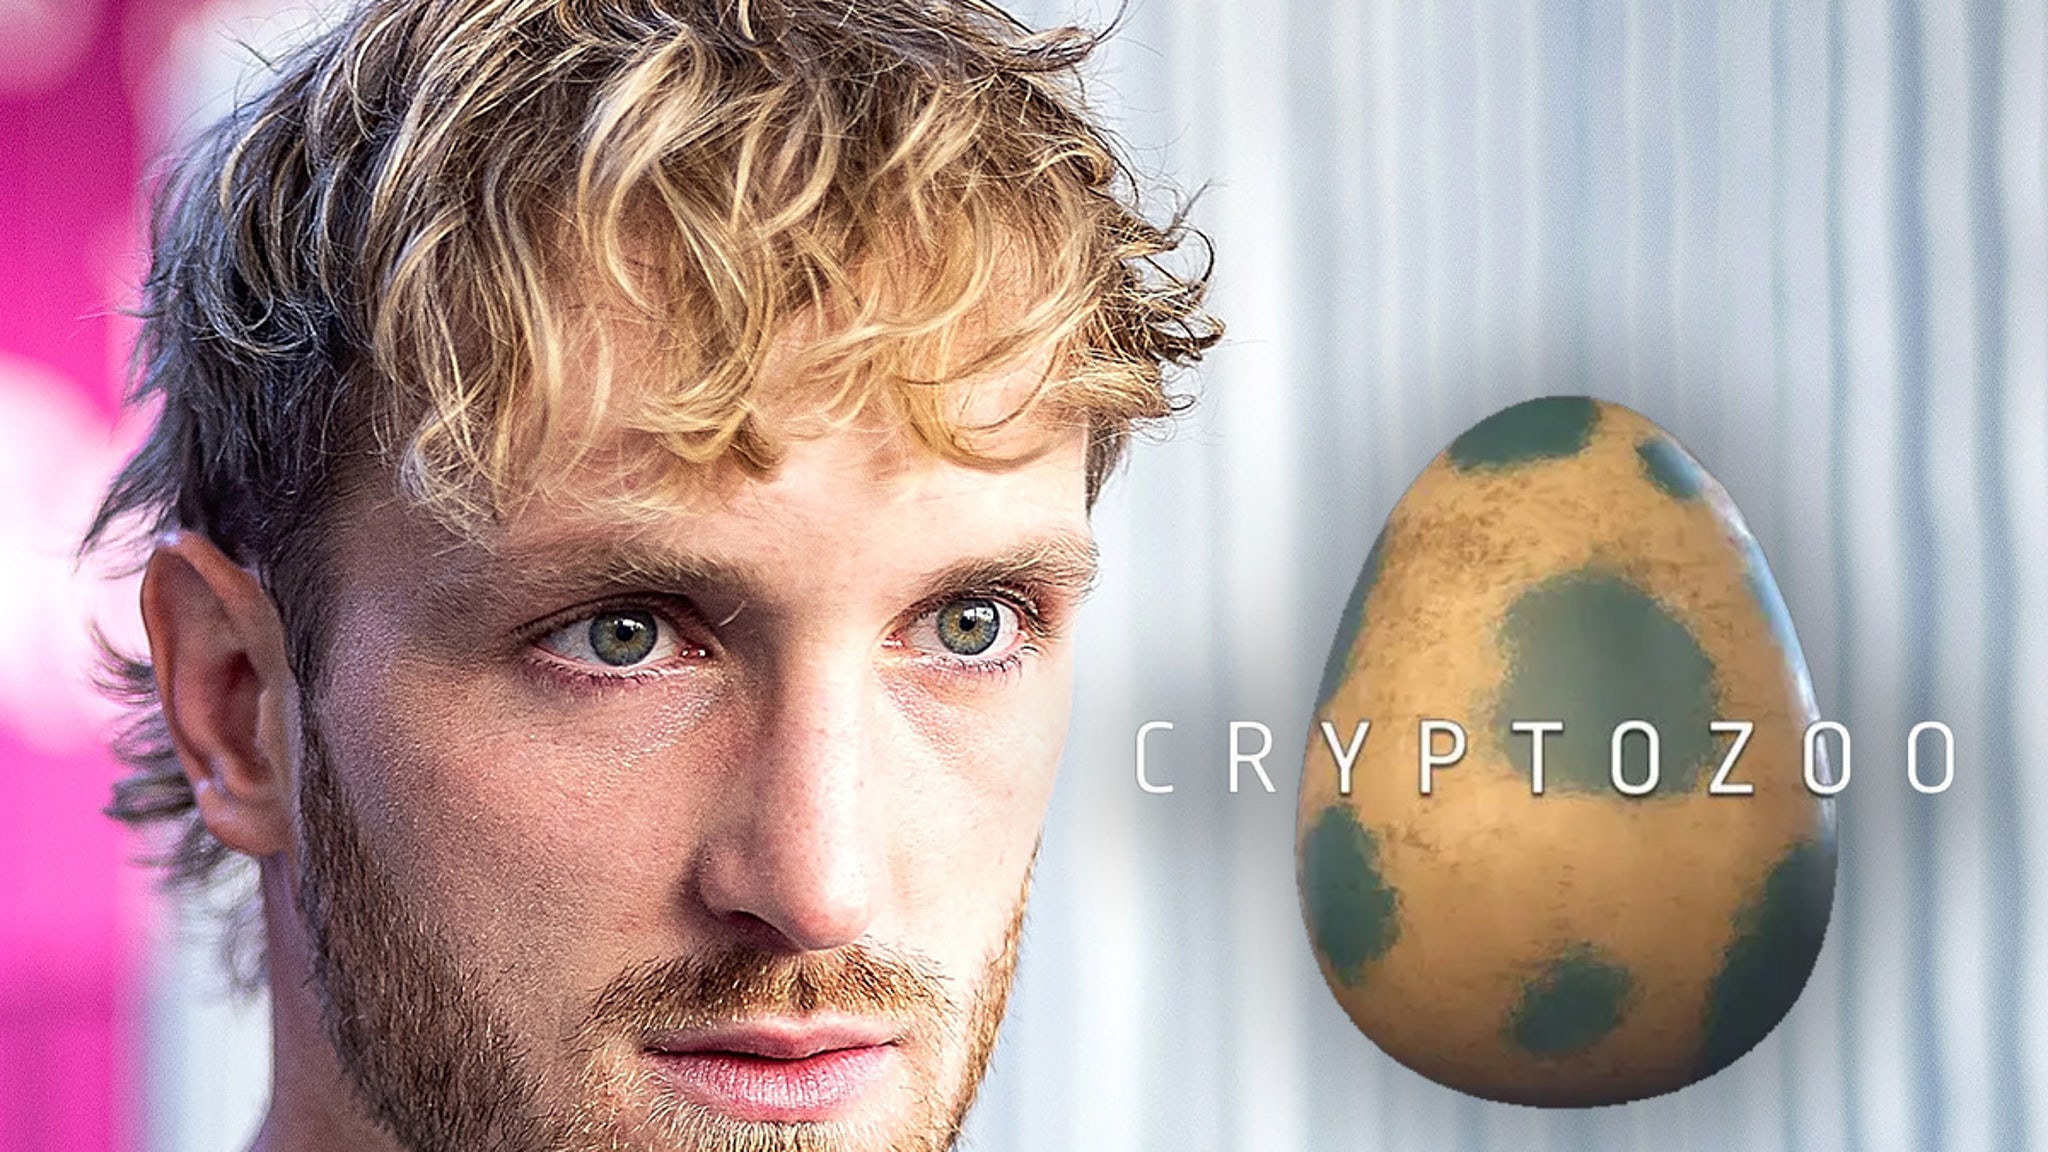 Logan Paul says he had suicidal thoughts amid CryptoZoo scandal